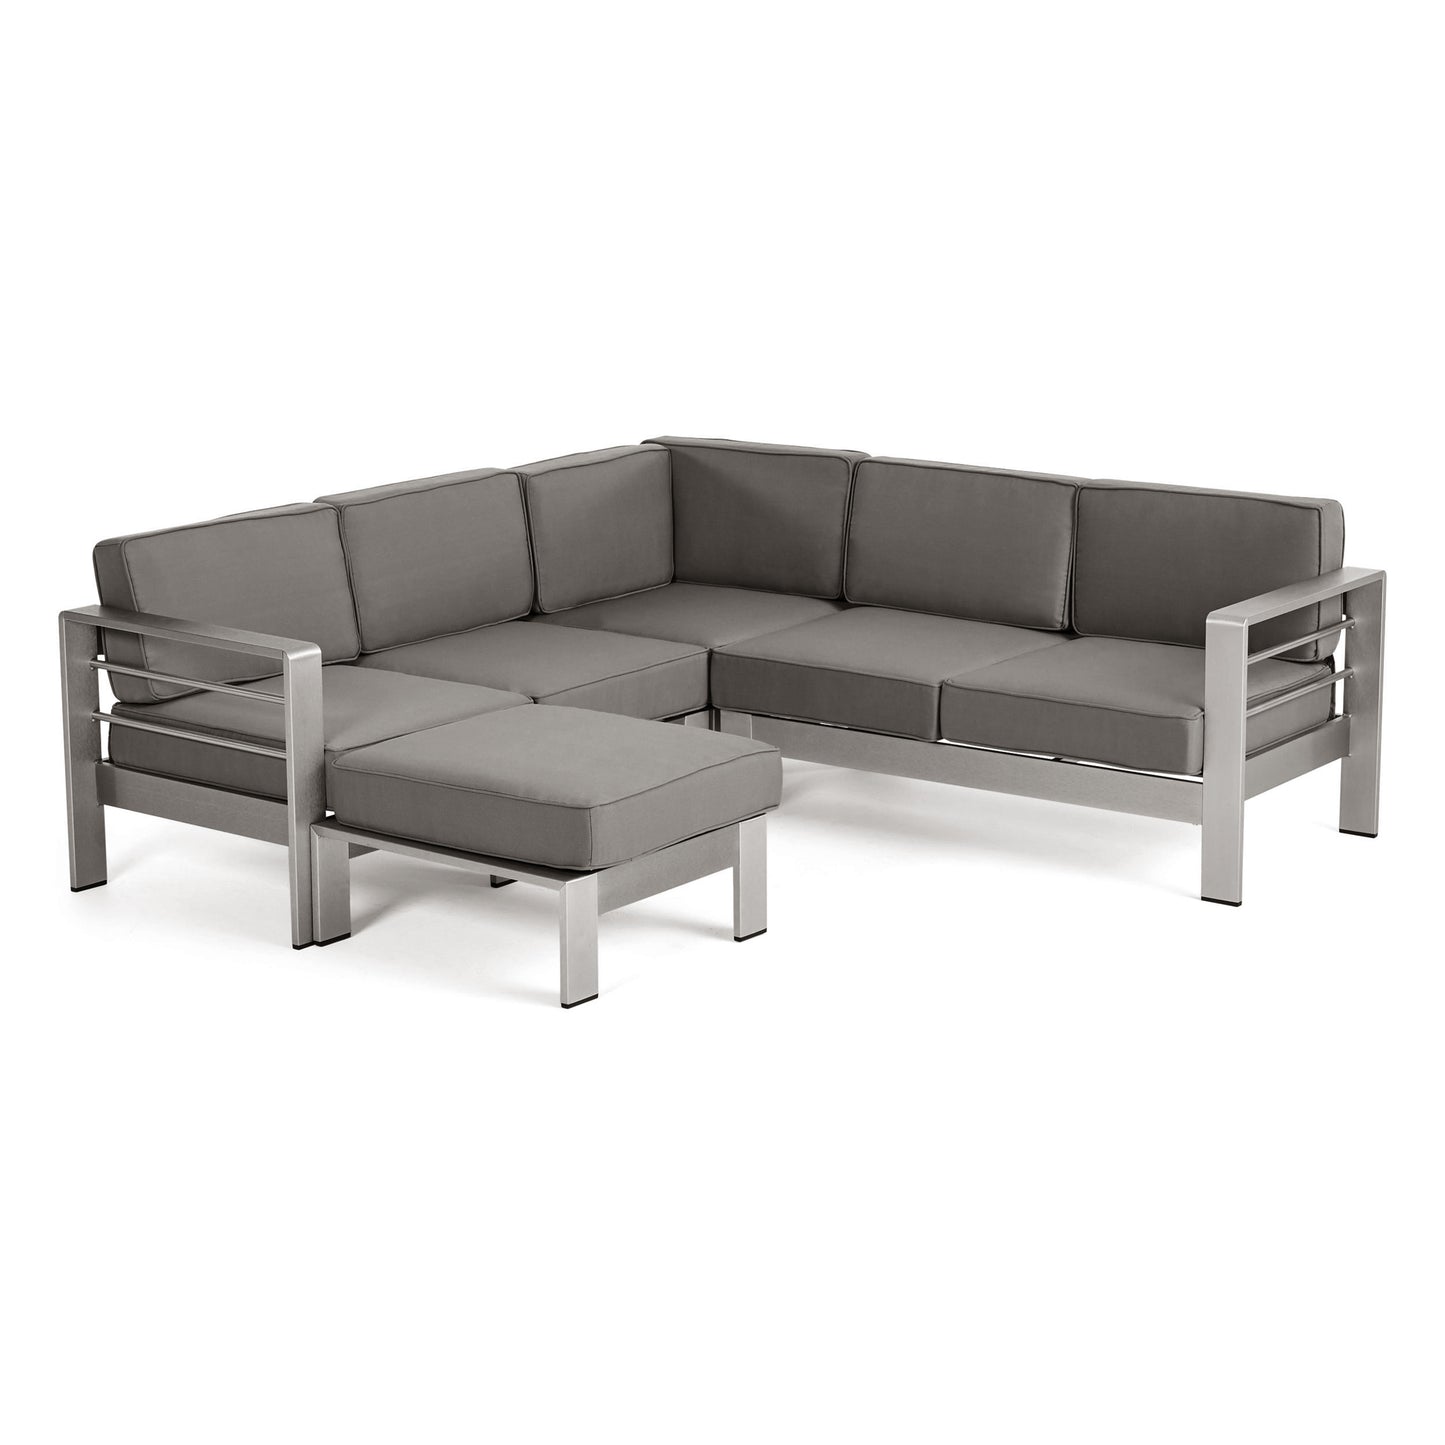 Emily Coral Outdoor Aluminum 5-Seater V-Shape Sectional Sofa Set with Ottoman, Silver and Khaki